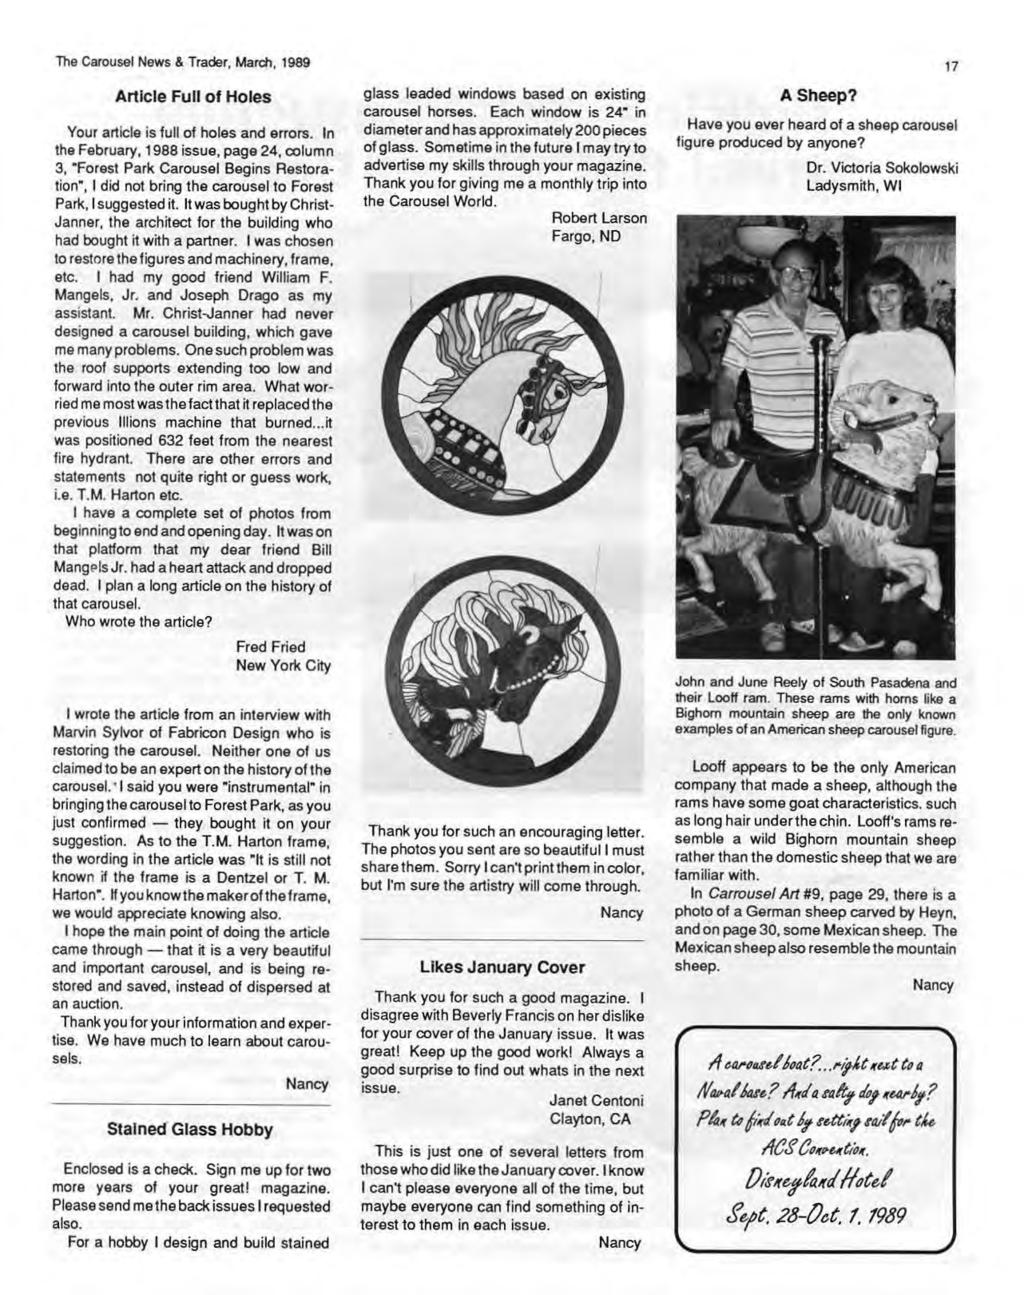 The Carousel News & Trader, March, 1989 Article Full of Holes Your article is full of holes and errors.